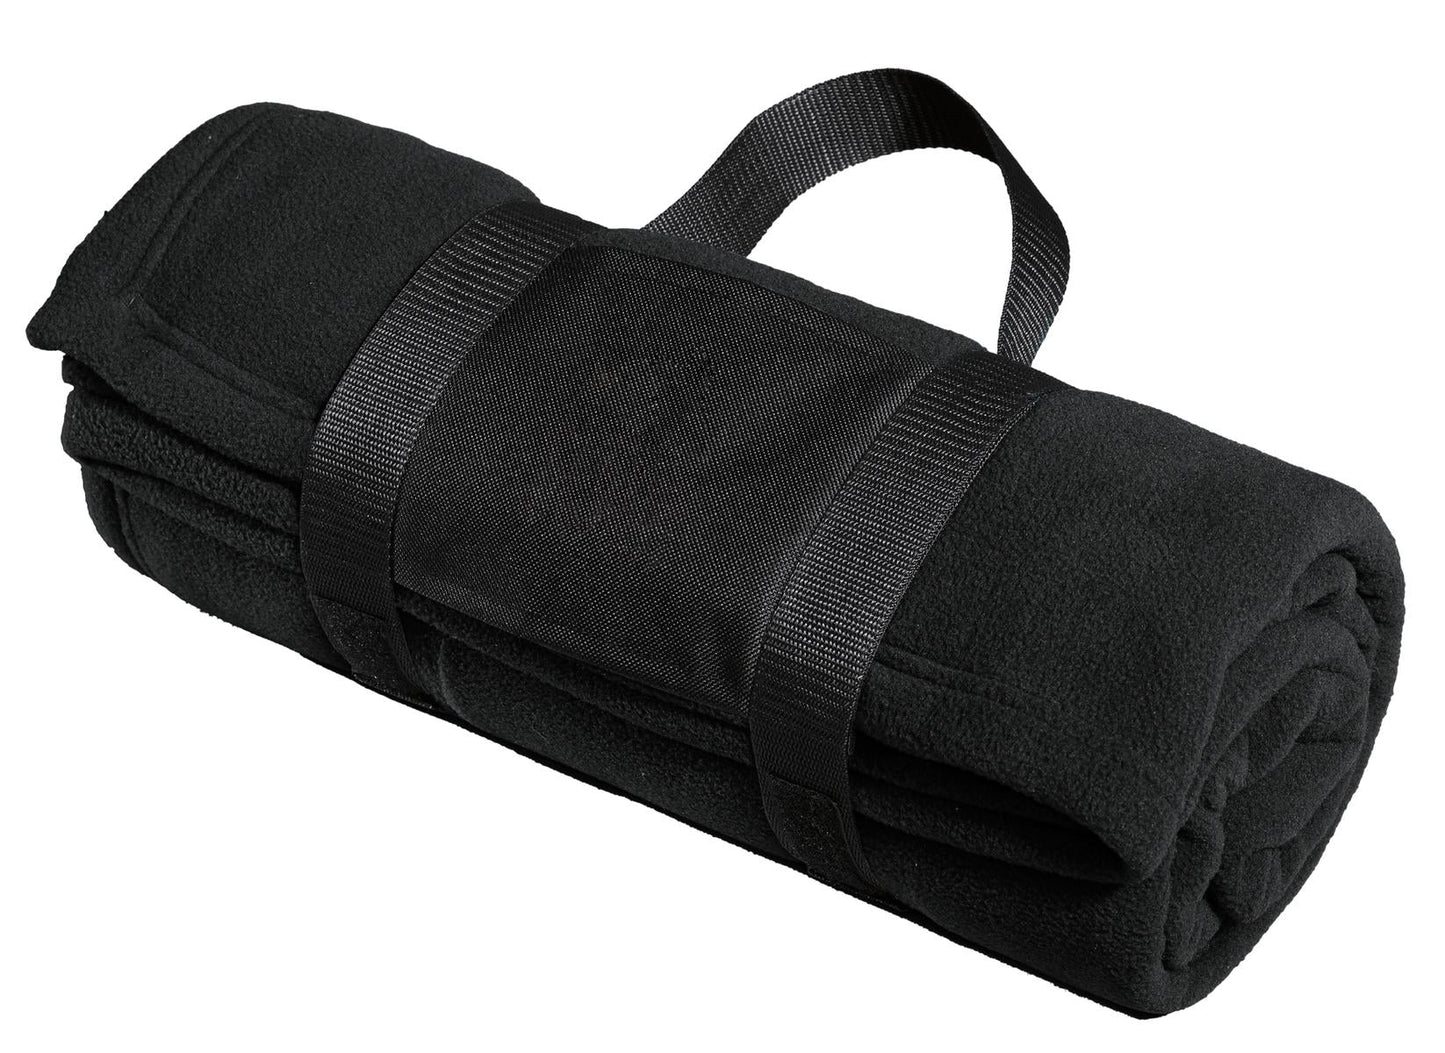 Port Authority® Fleece Blanket with Carrying Strap. BP20 - DFW Impression